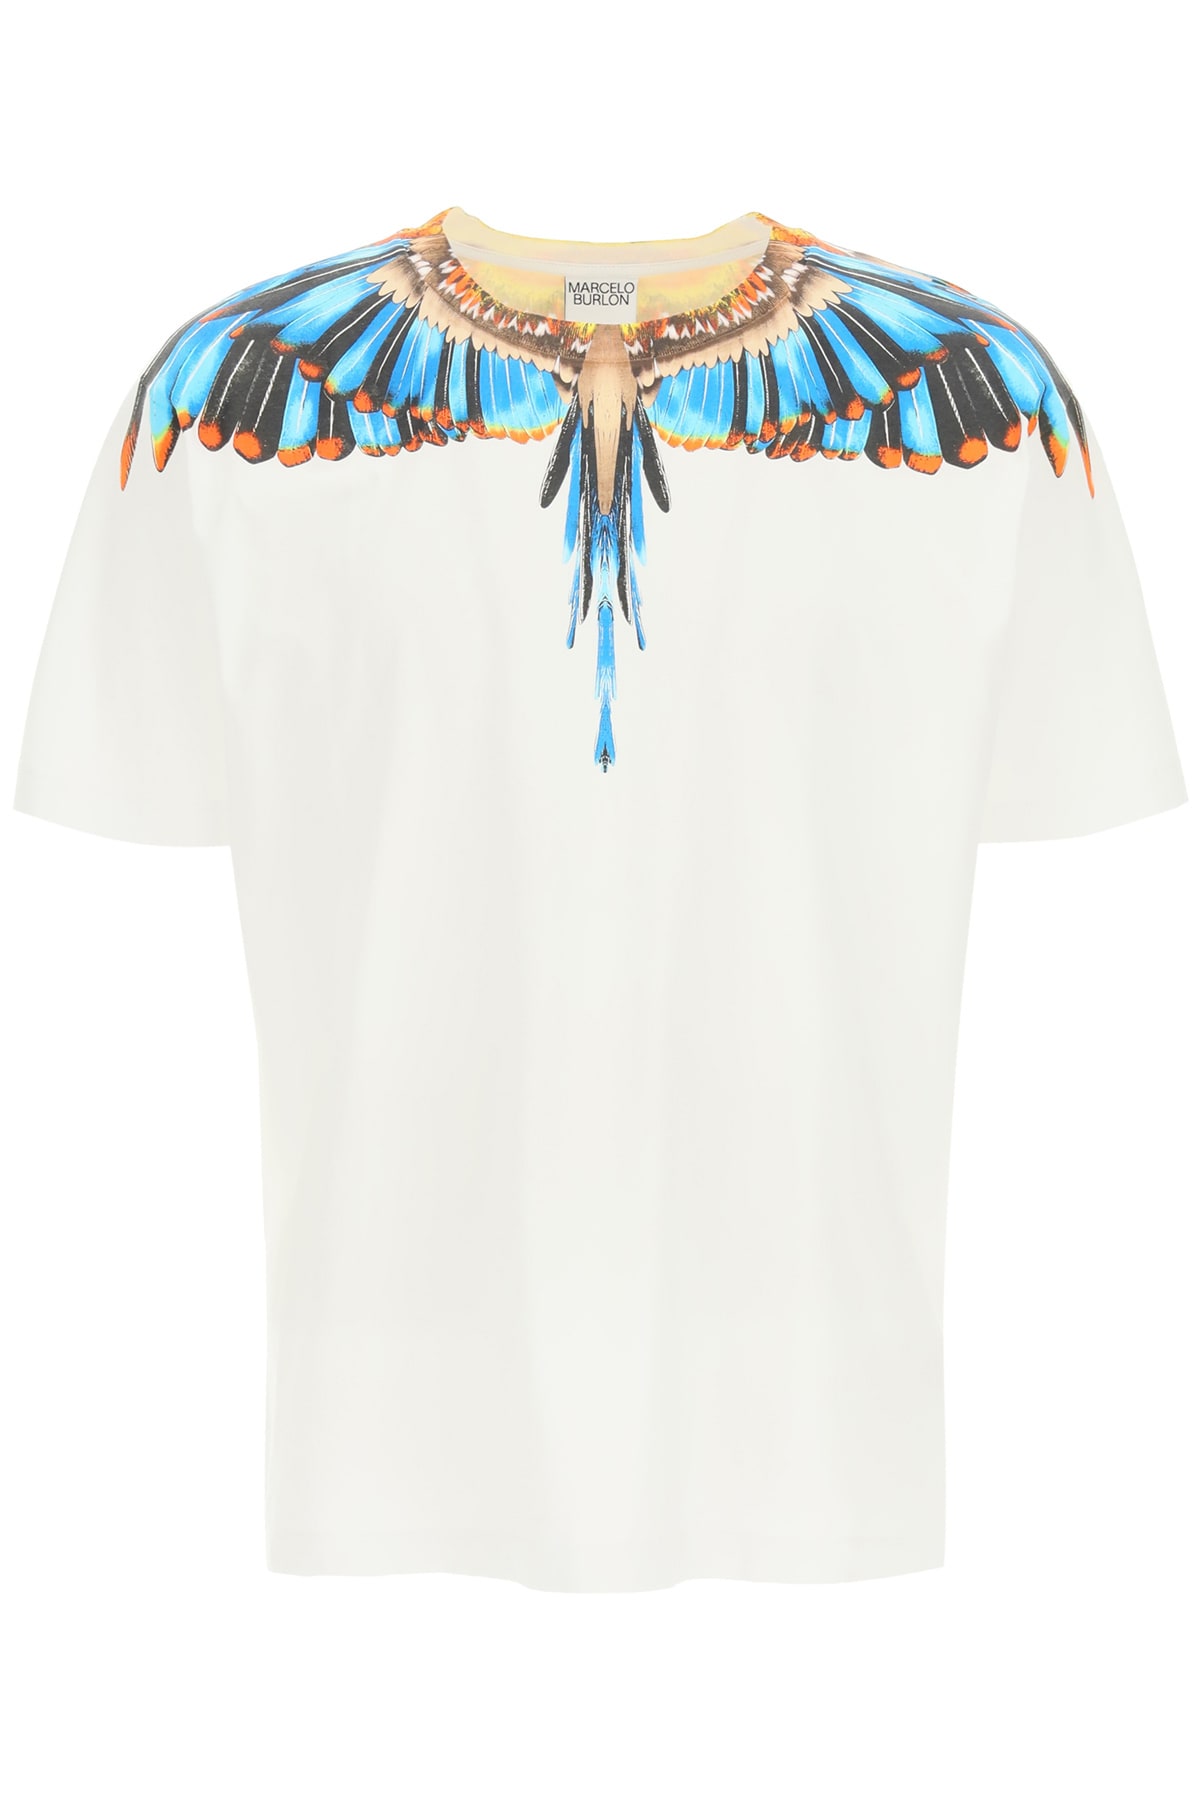 MARCELO BURLON COUNTY OF MILAN GRIZZLY WINGS PRINT T-SHIRT,CMAA018S21JER002 0140